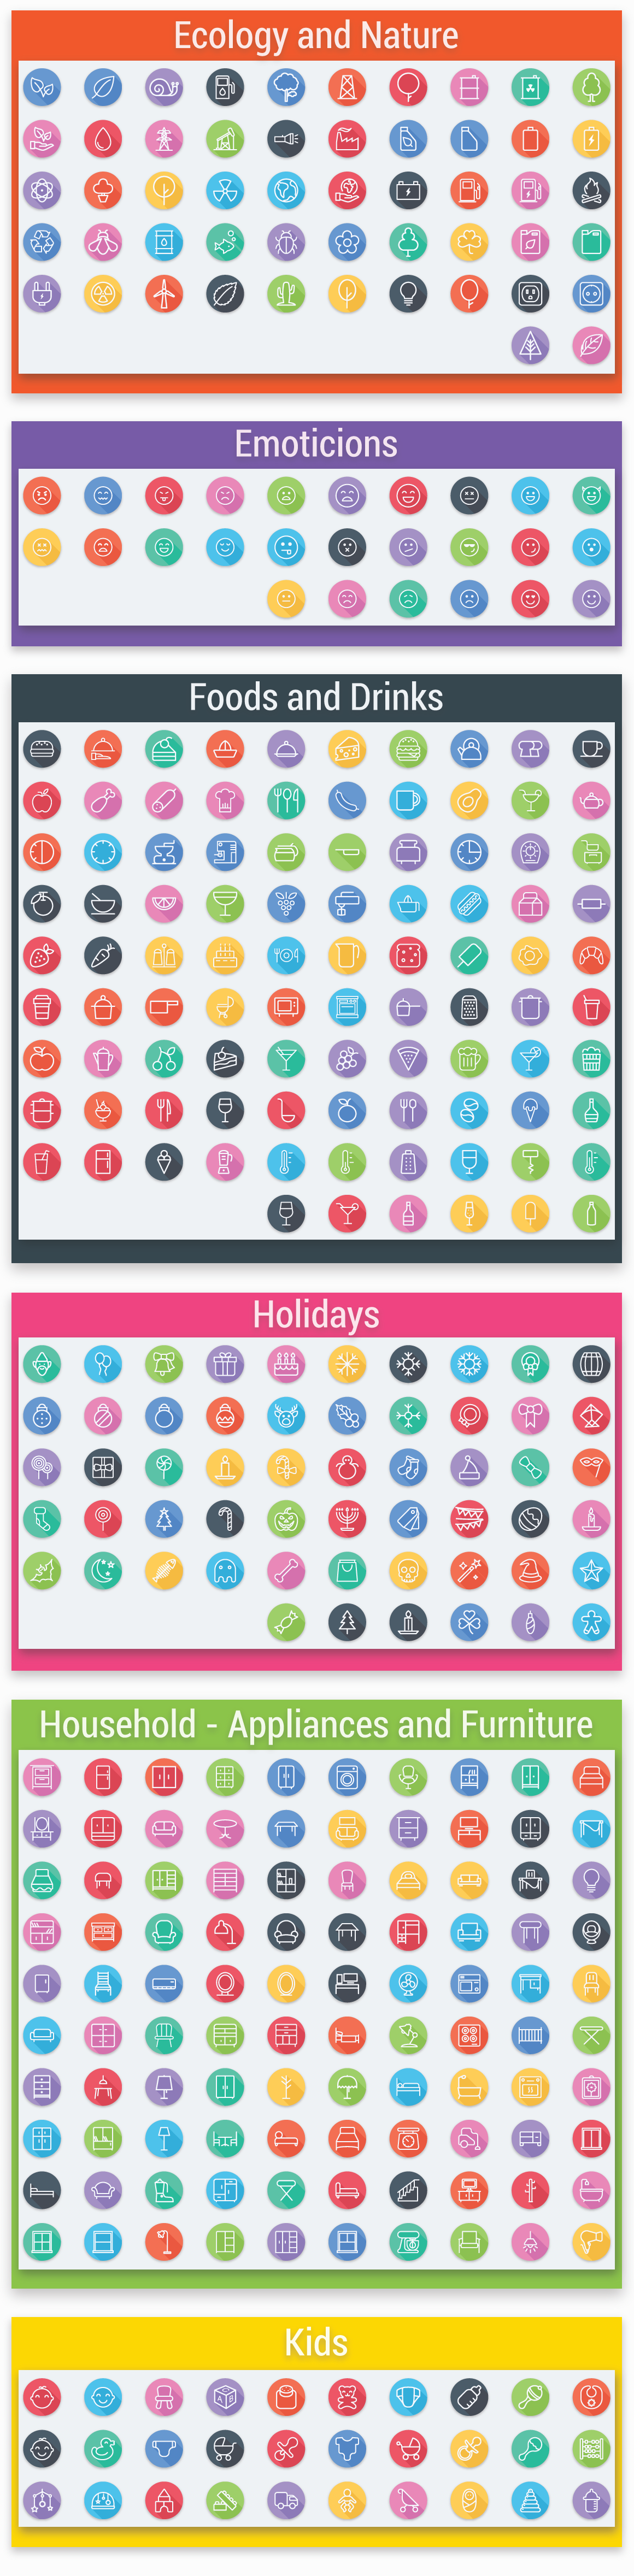 flat icons line icons outline icons design ios icons android icons free icons web icons app icons colorful FLAT LINE ICONS icons set vector infographic